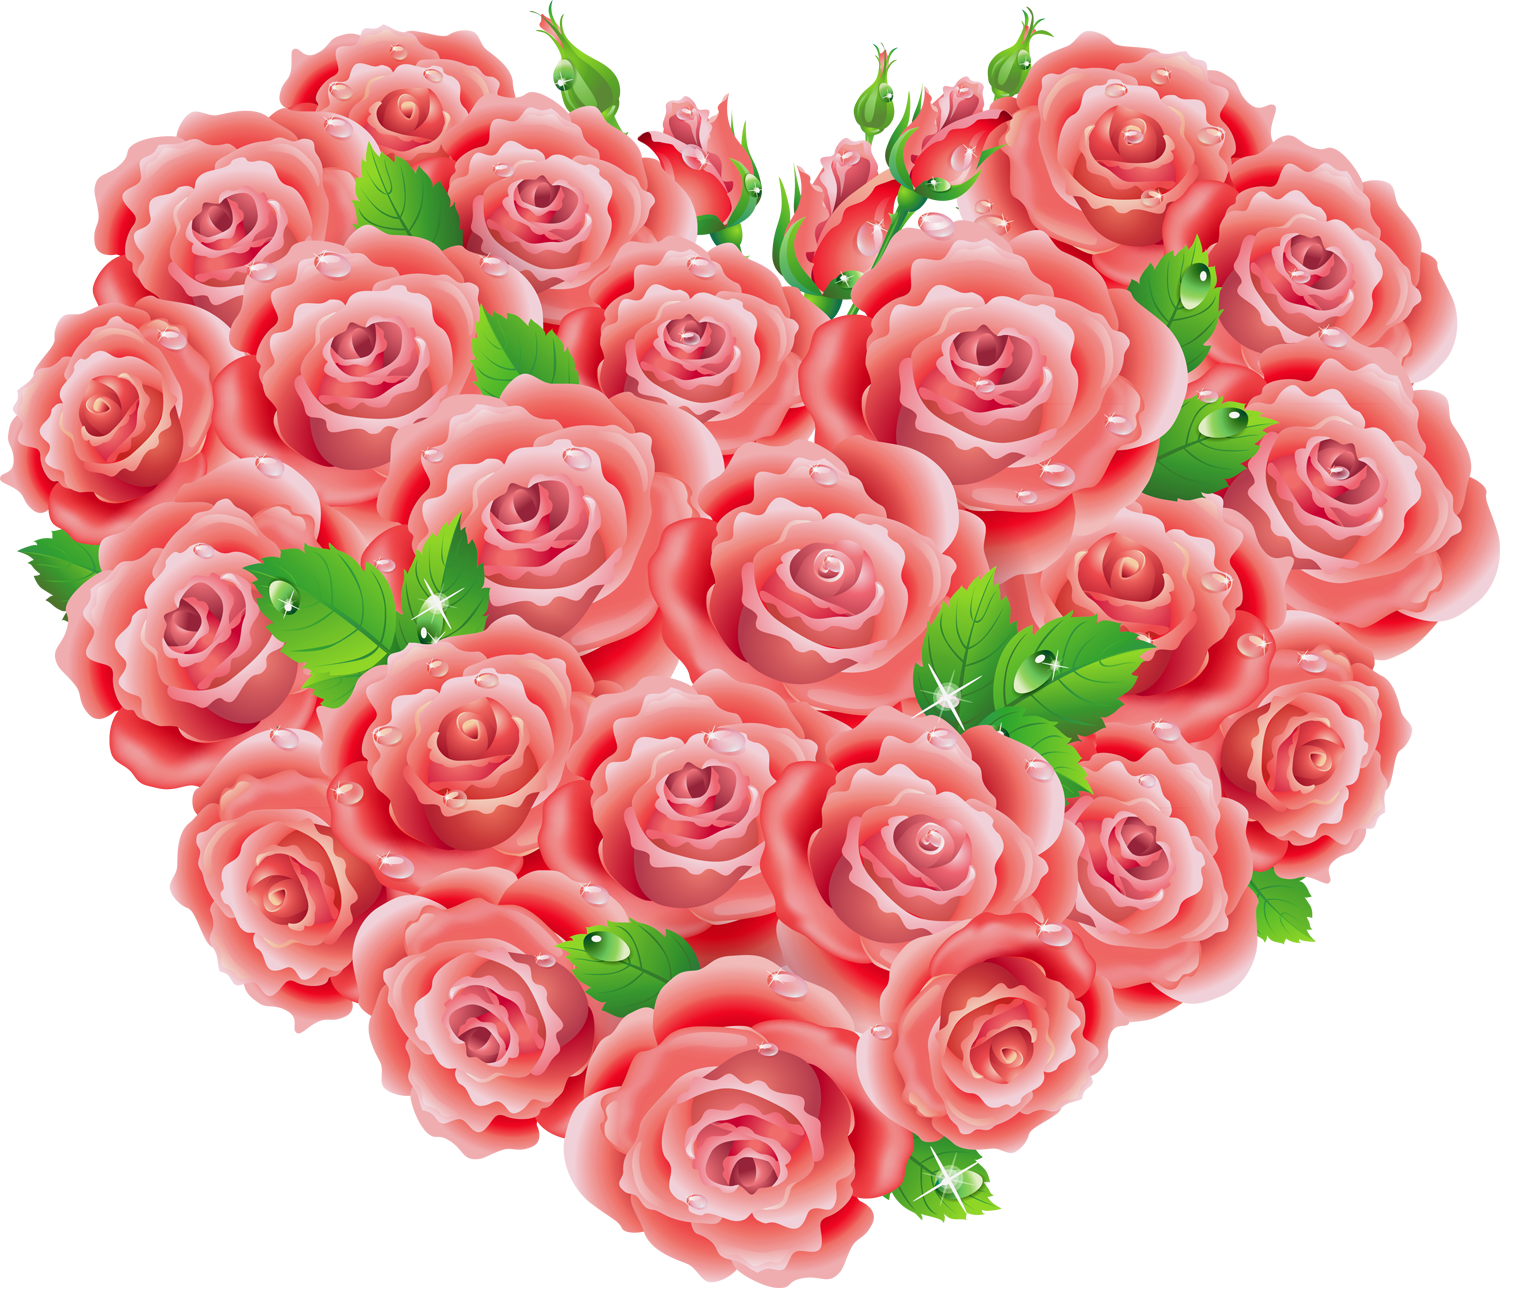 clipart images of red roses - photo #33